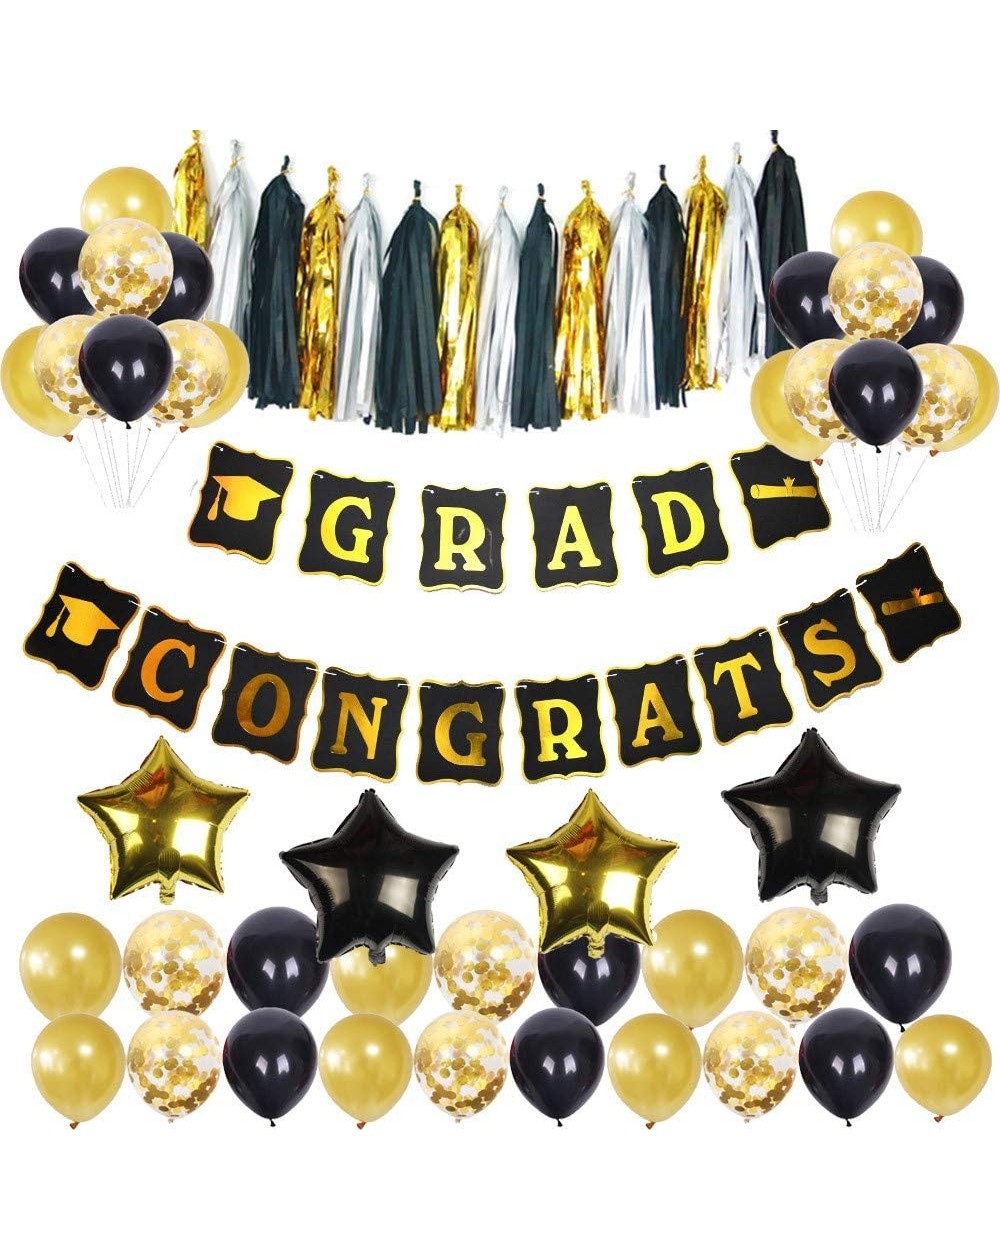 Balloons New Year Eve Party 2020 Decorations Kit- Gold and Black Balloons Set-Star Bslloons-Paper Tassel-CONGRATS Banner Perf...